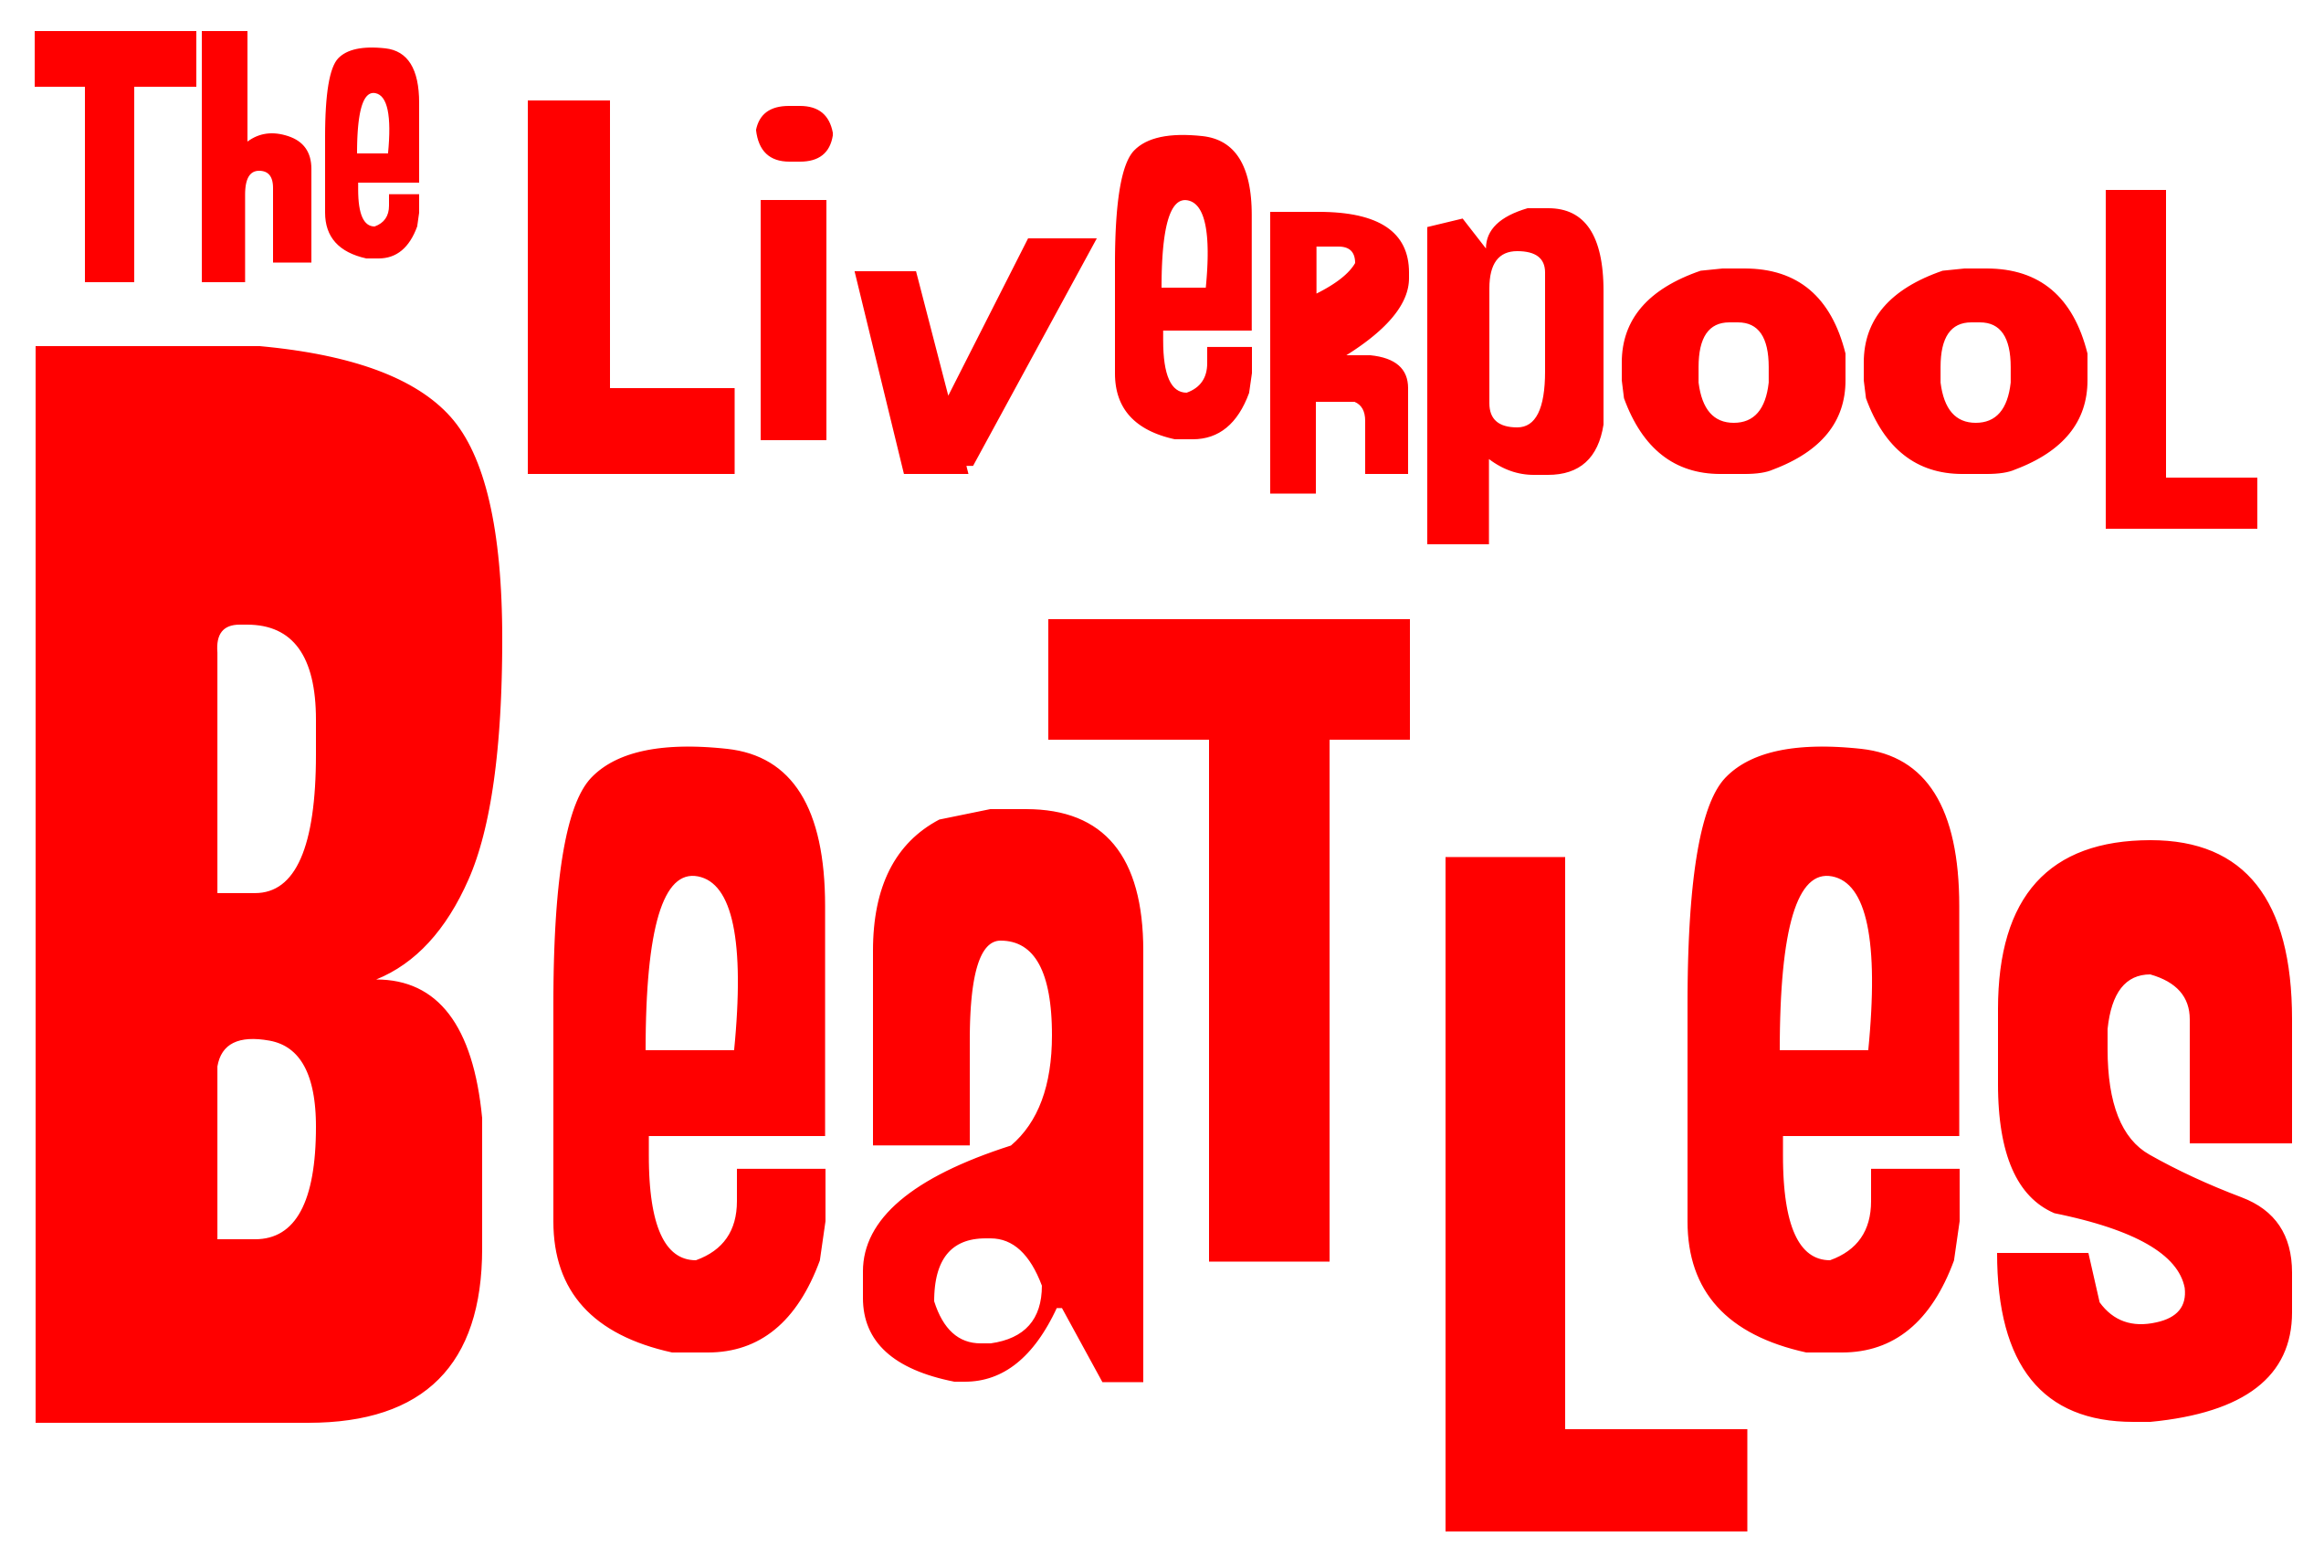 THE LIVERPOOL BEATLES